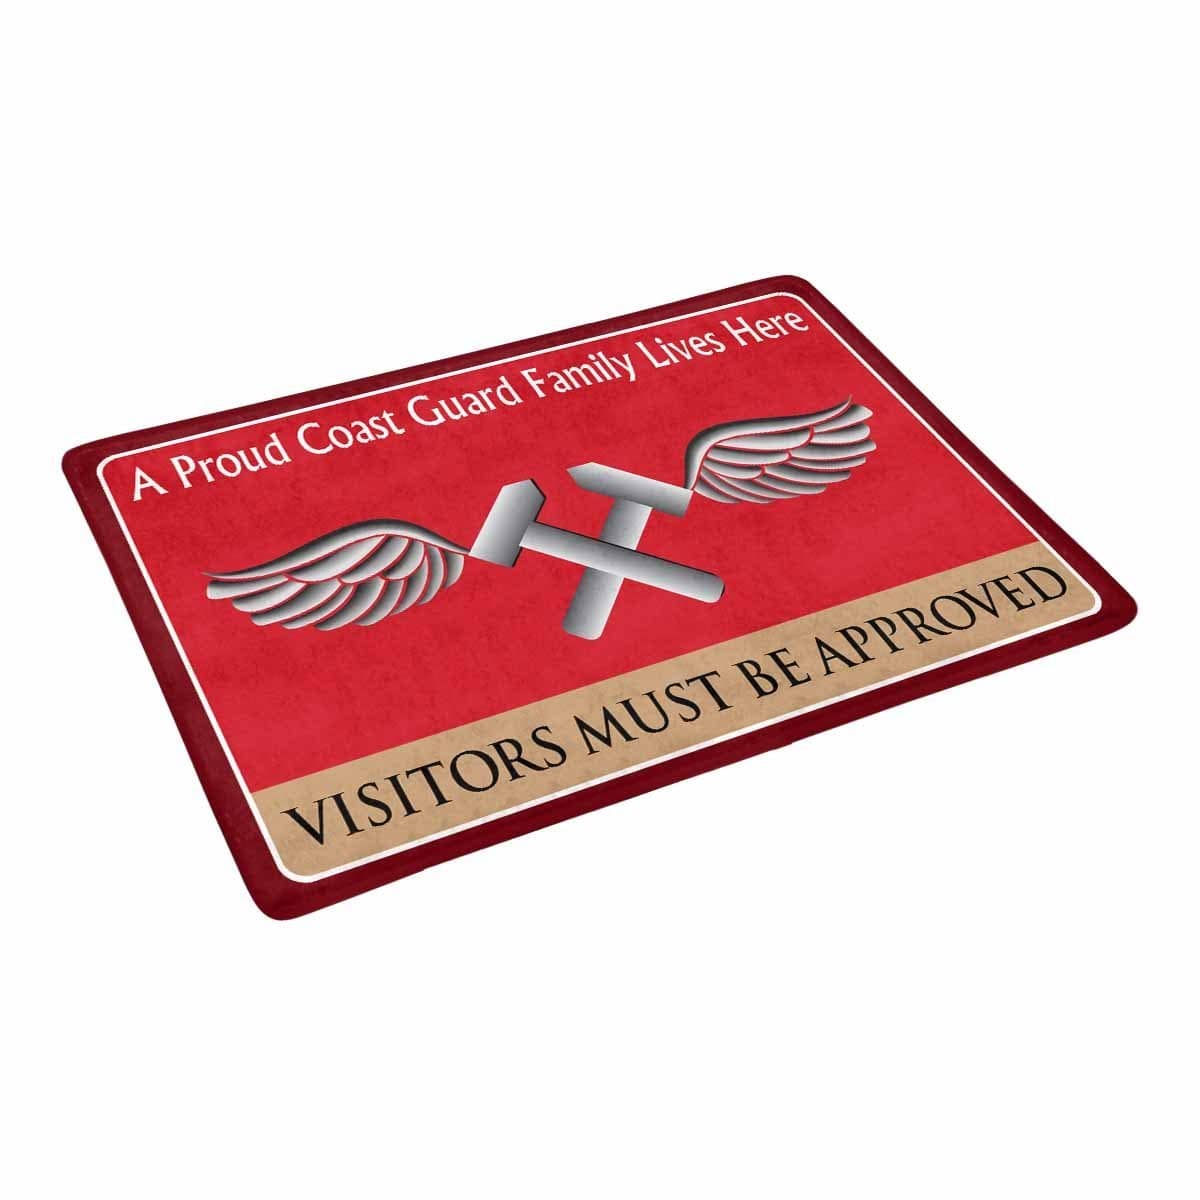 US Coast Guard Aviation Metalsmith AM Logo Family Doormat - Visitors must be approved (23.6 inches x 15.7 inches)-Doormat-USCG-Rate-Veterans Nation